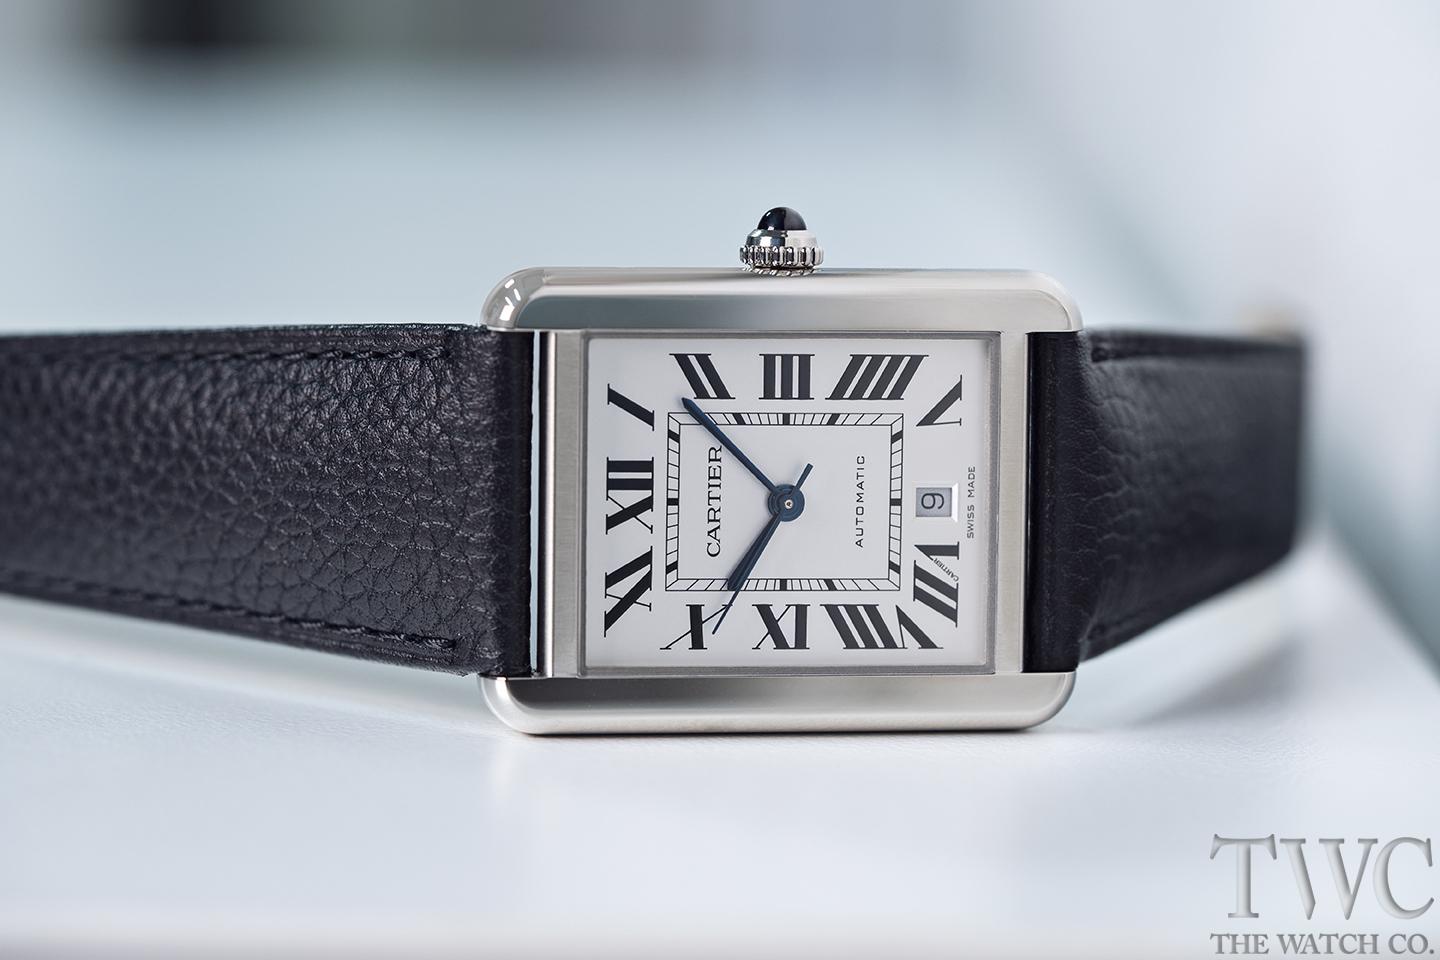 5 Square & Rectangular Watches For A Fresh Look